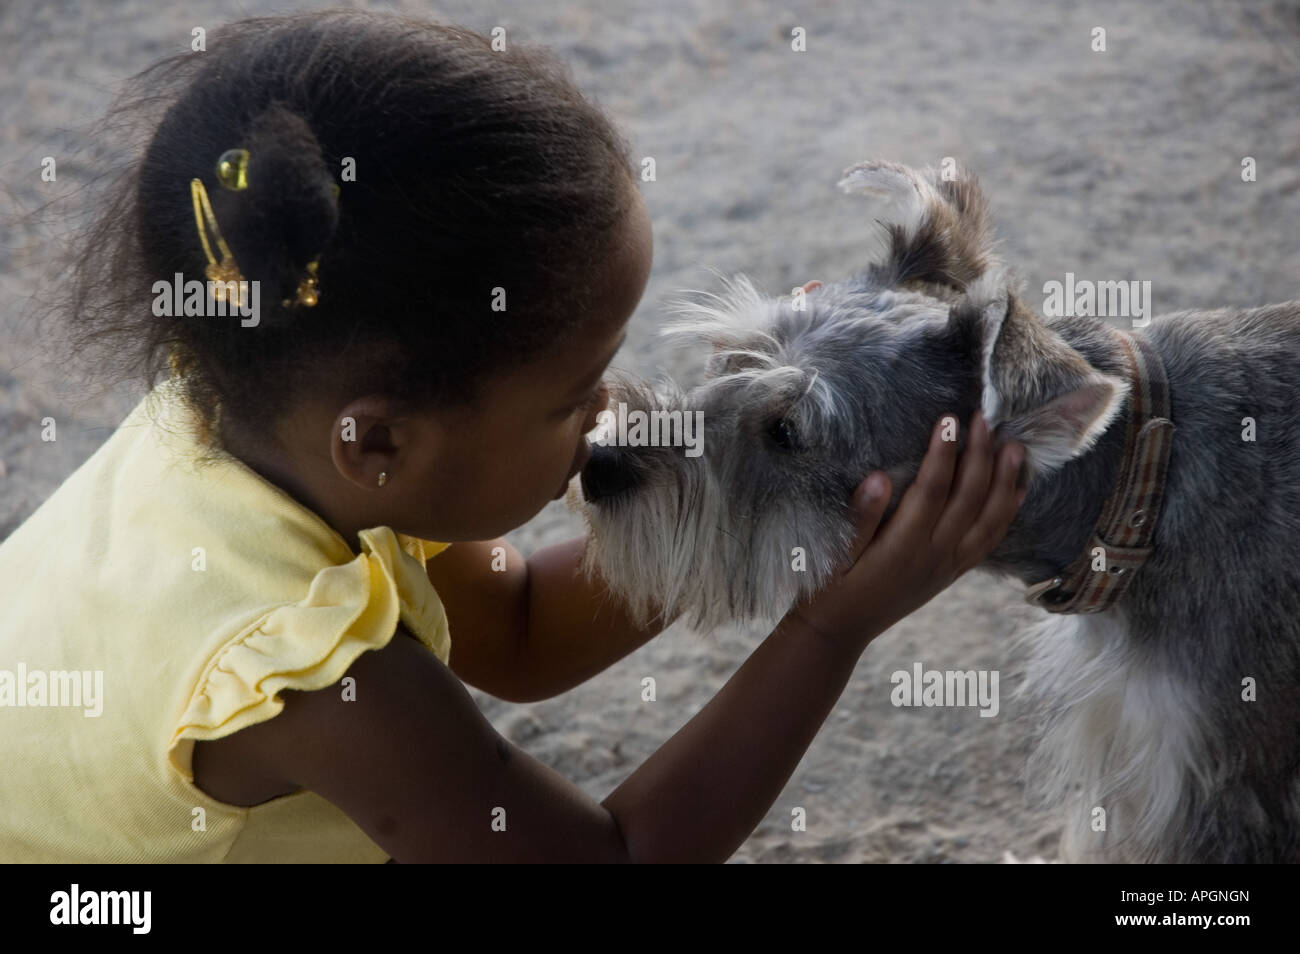 A young girl's face to face meeting with a dog Stock Photo